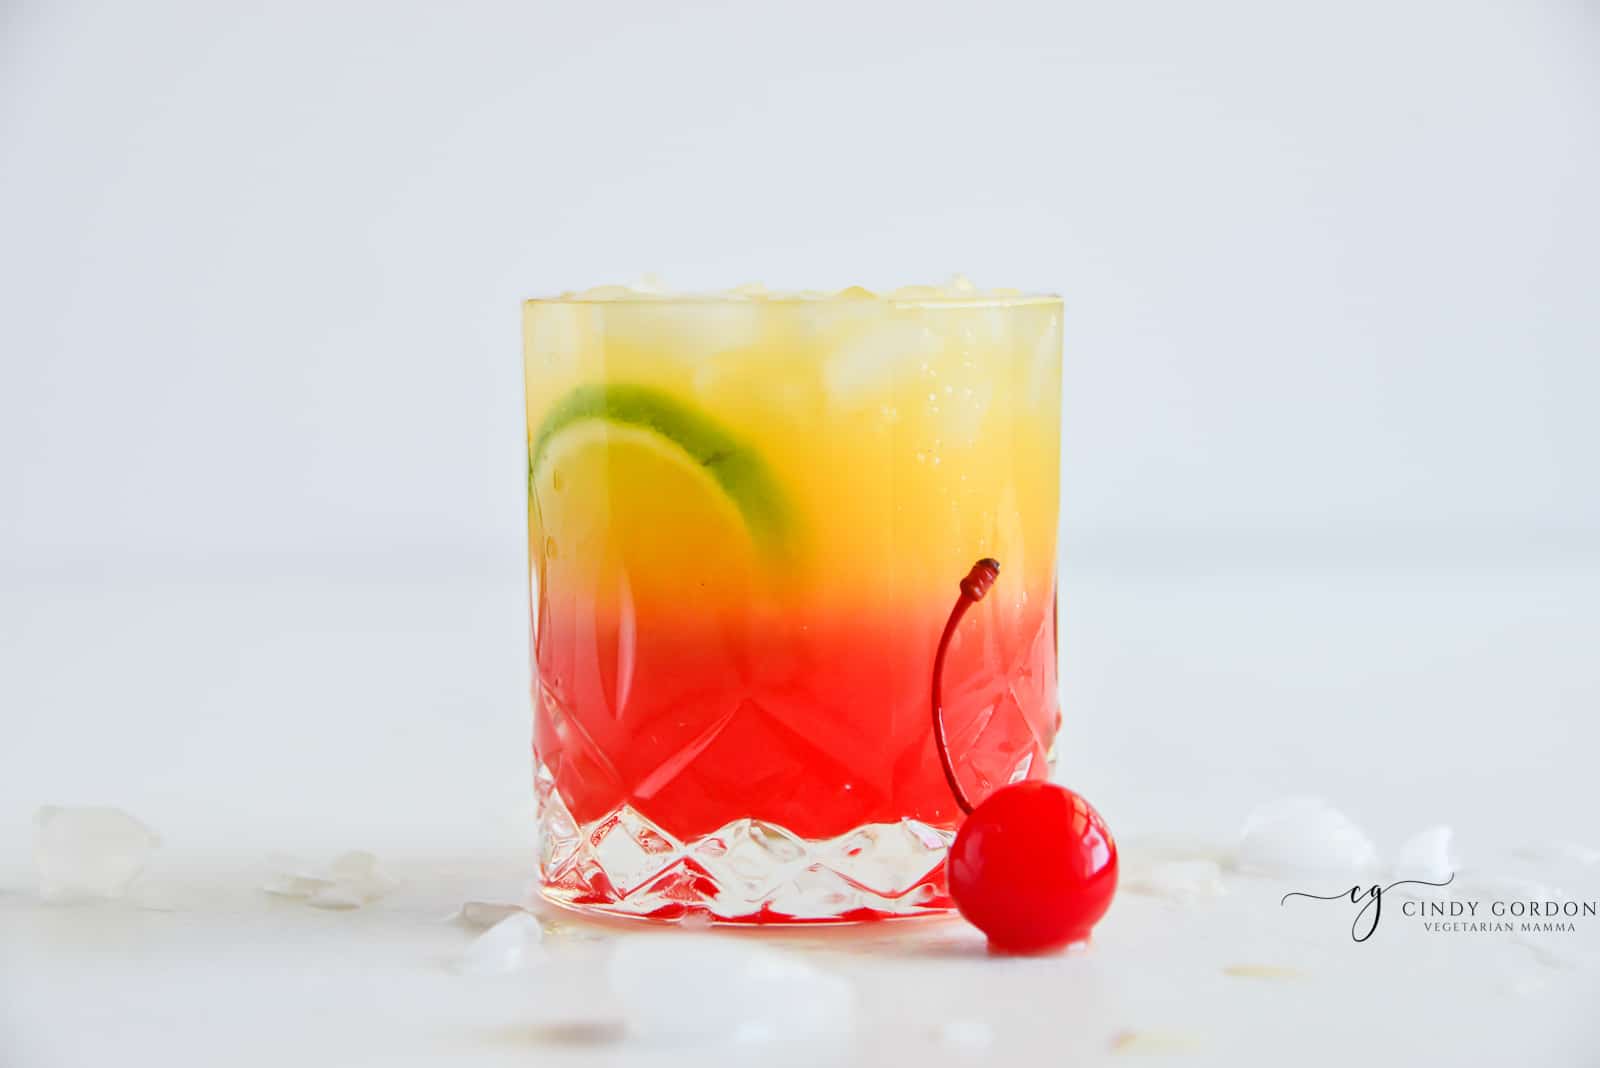 malibu sunrise drink on a rocks glass with red and yellow layers and a maraschino cherry on the side.